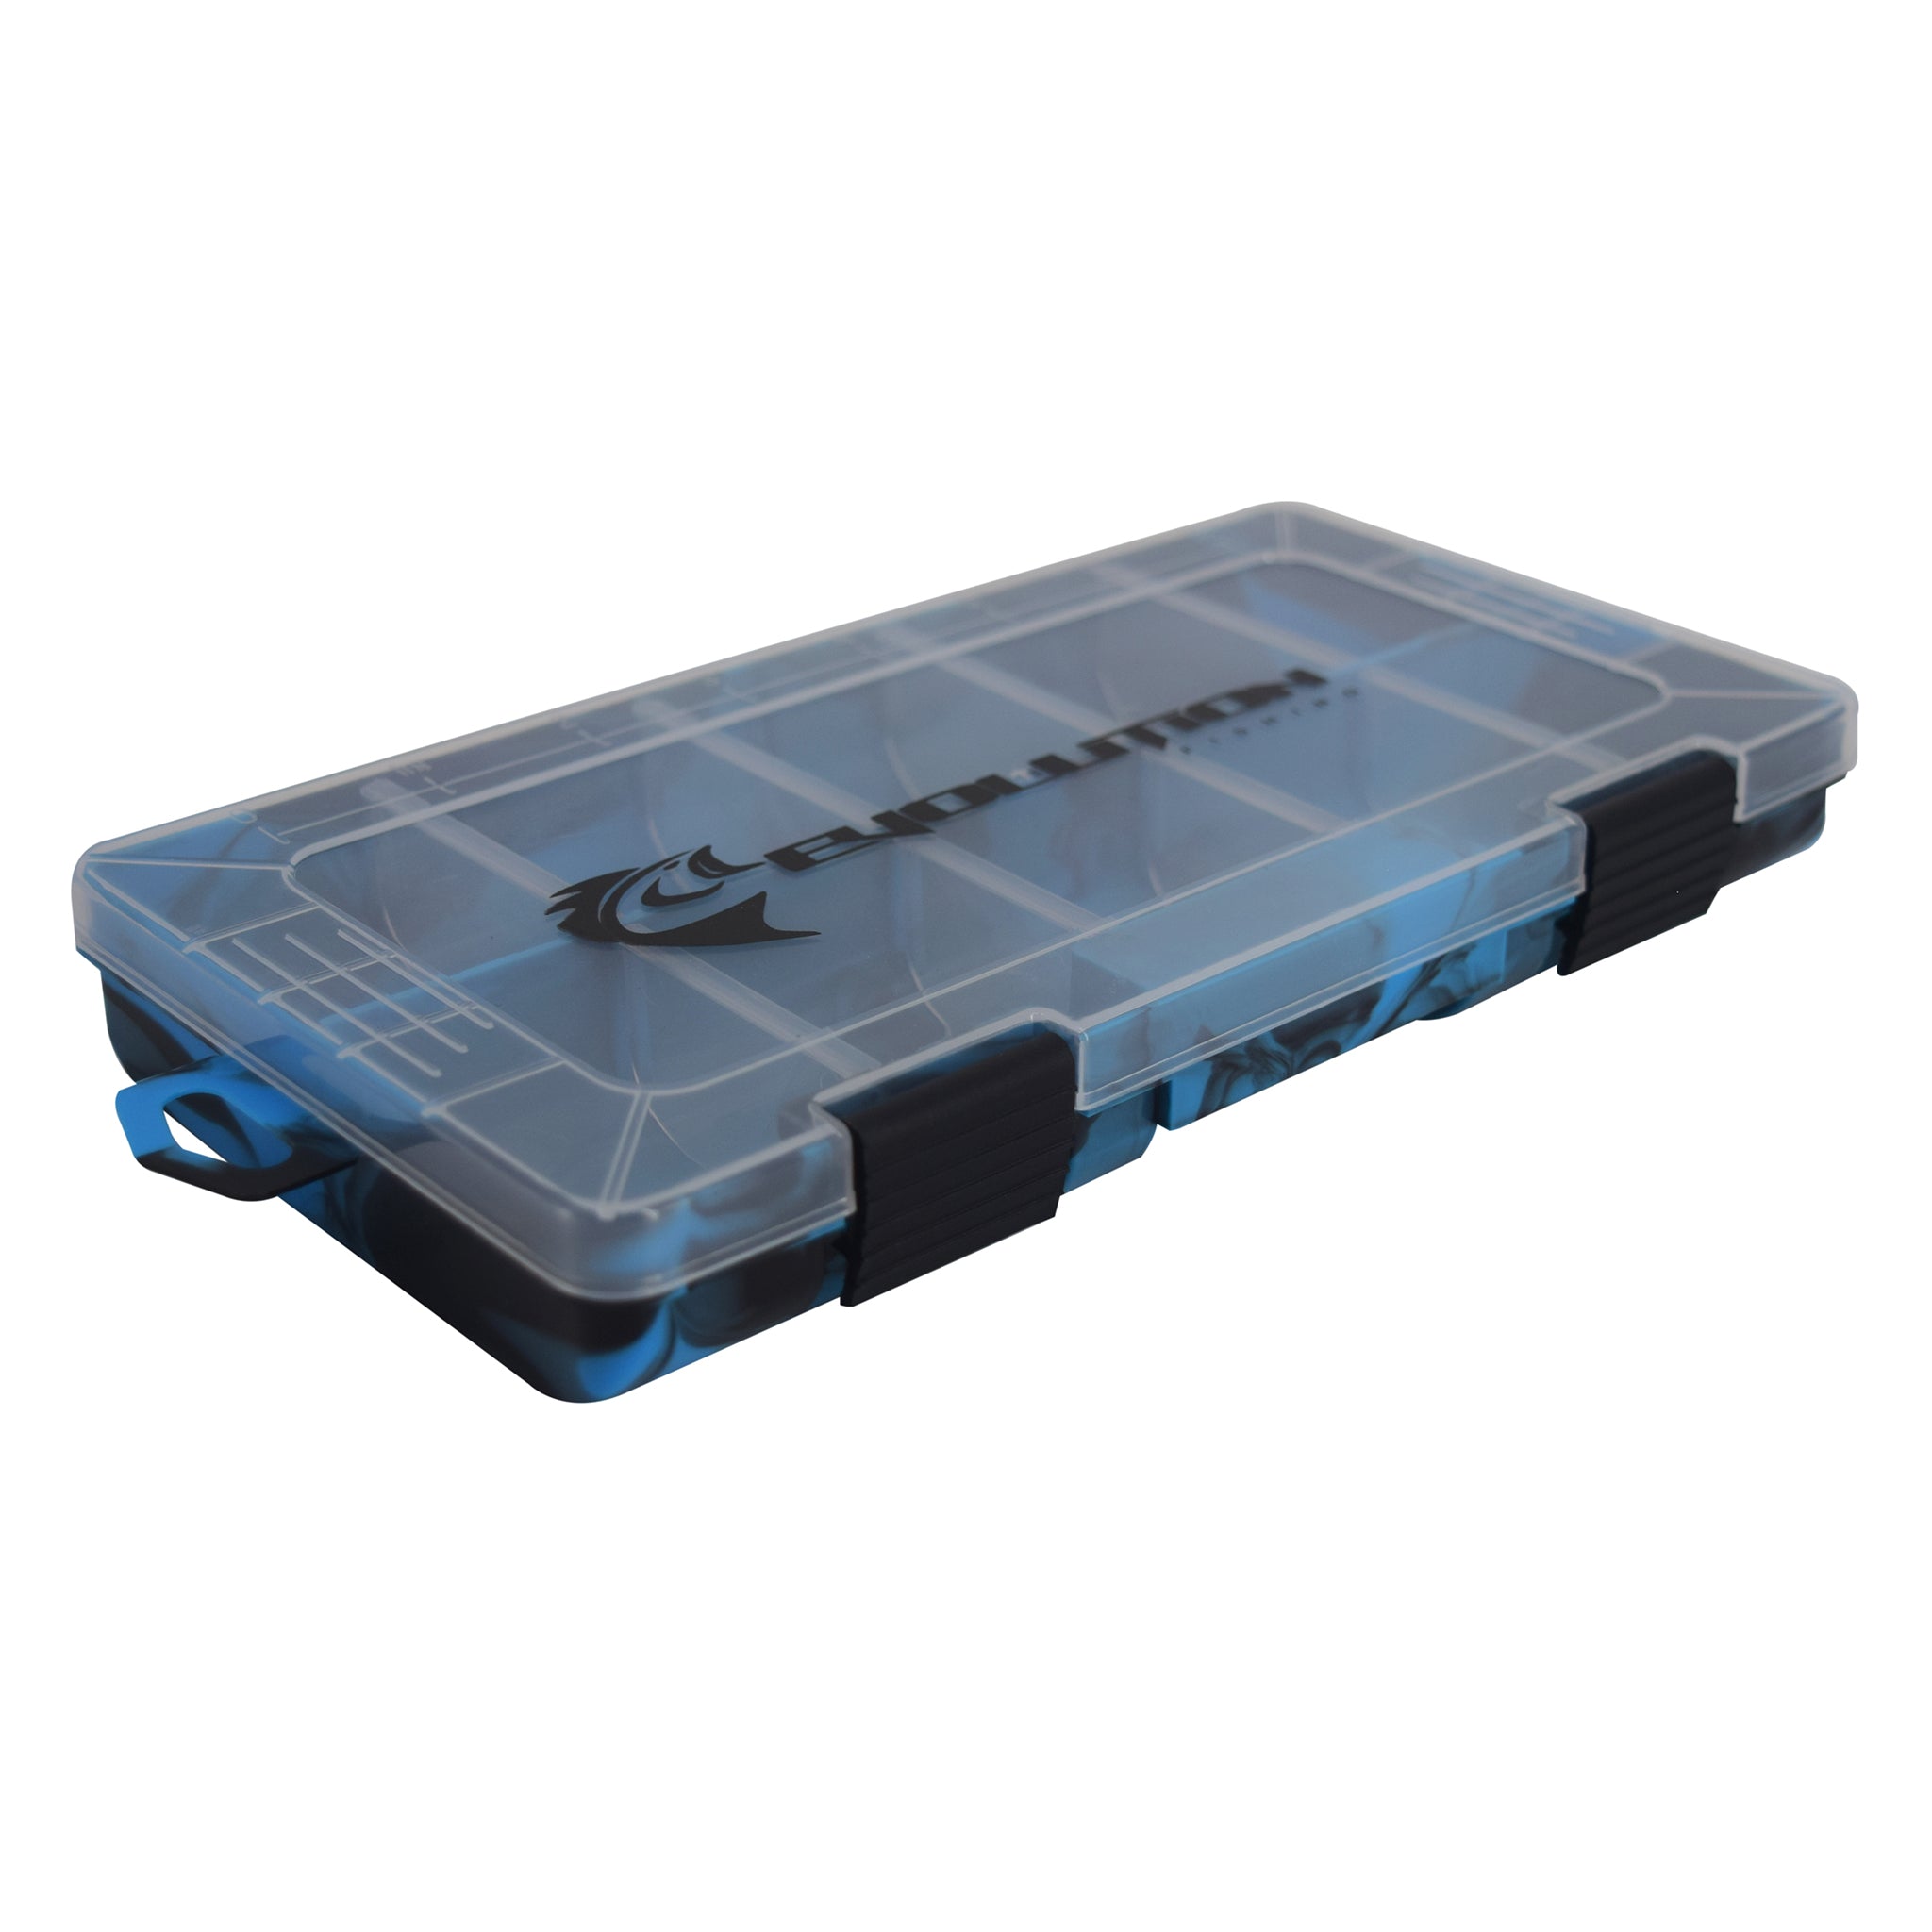 Evolution Fishing Drift Series 3500 Colored Tackle Tray, Blue/Black